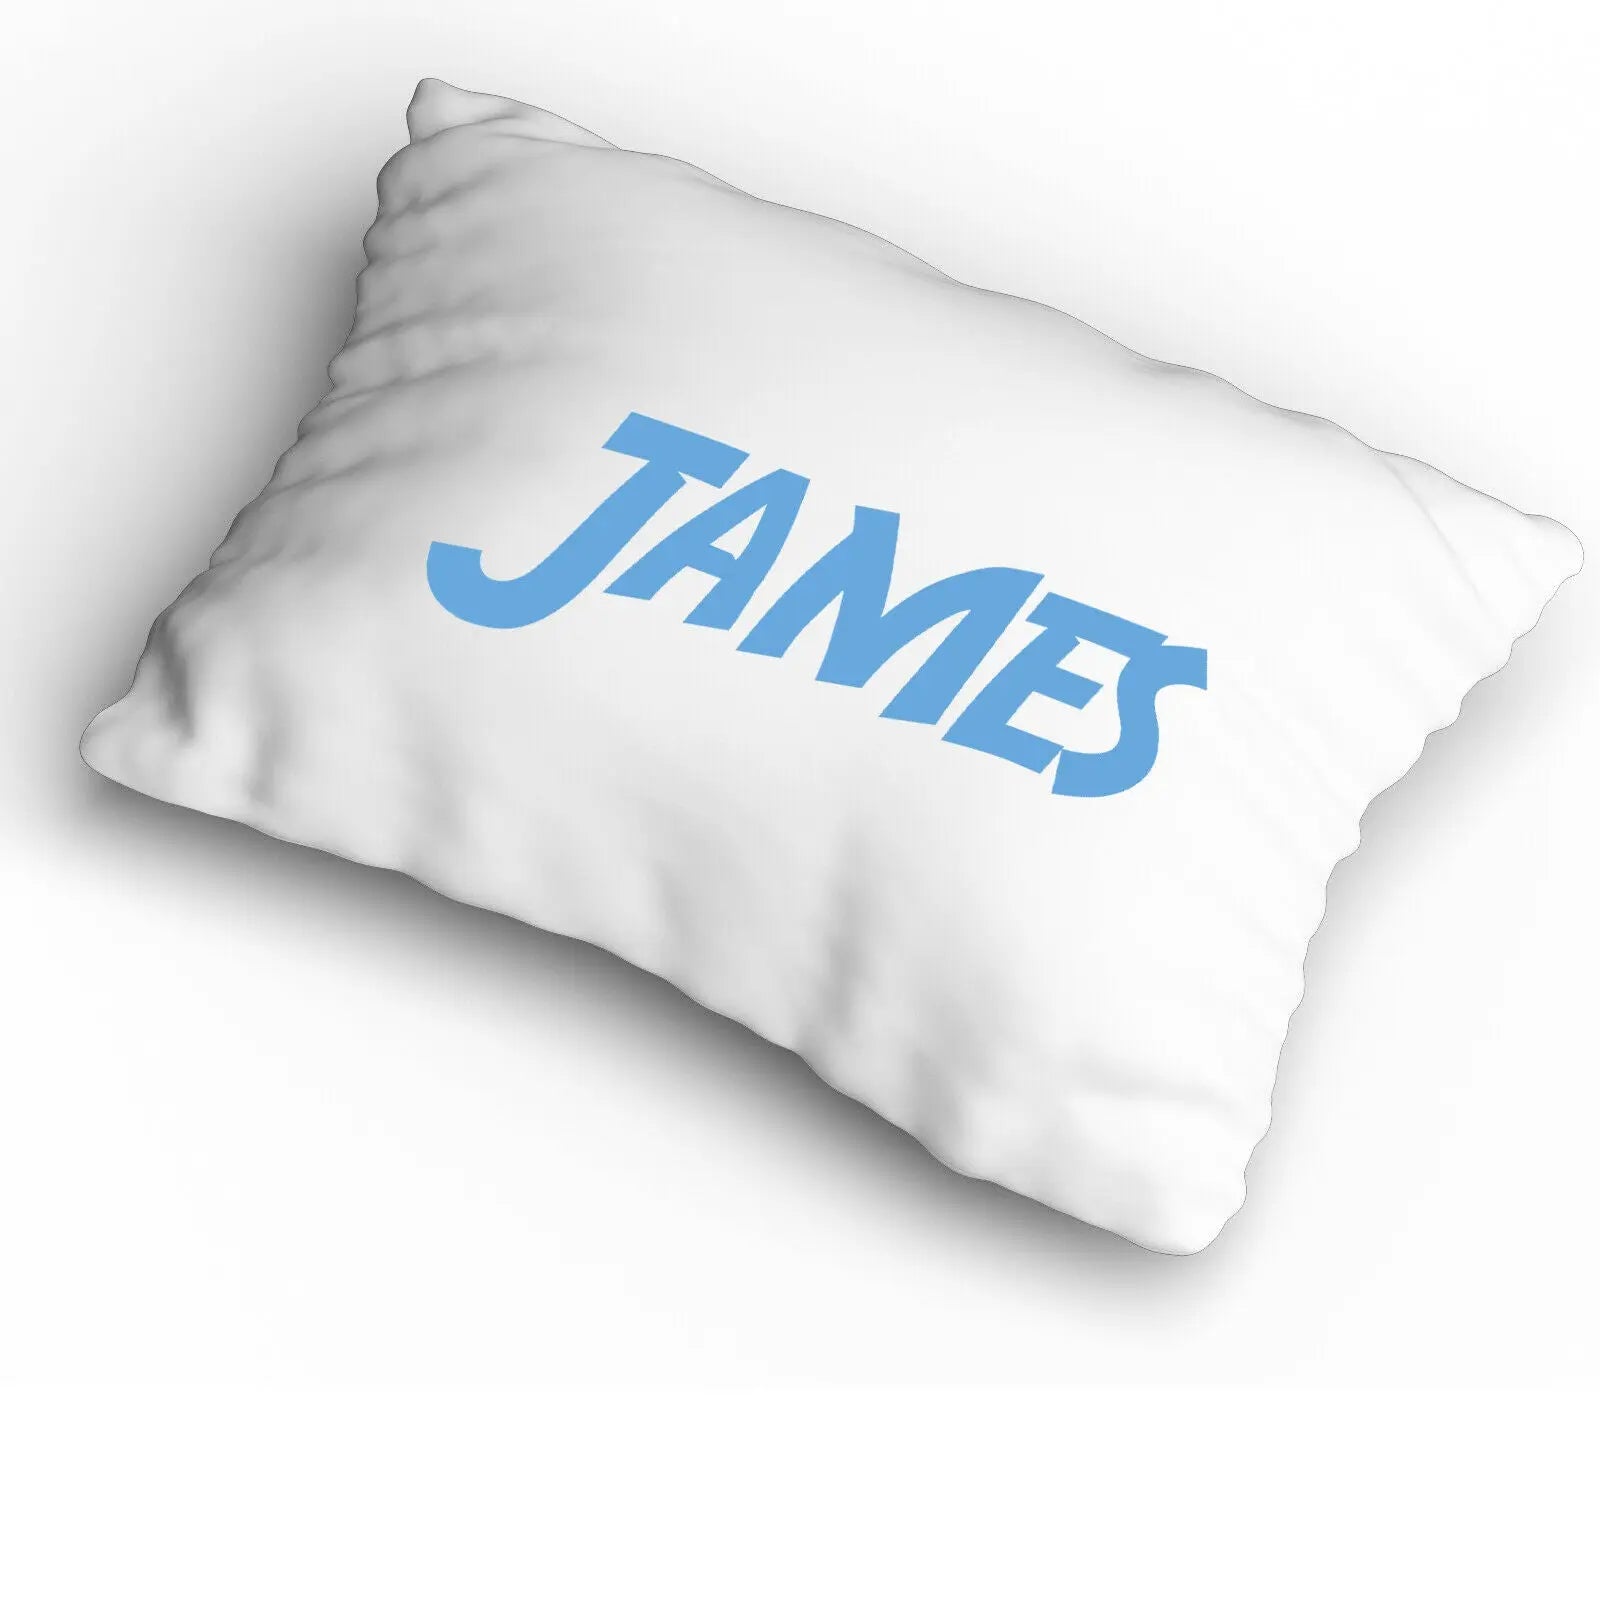 Personalised Name Cover Pillowcase Custom Gift Initials Pillow Case - Blue - CushionPop